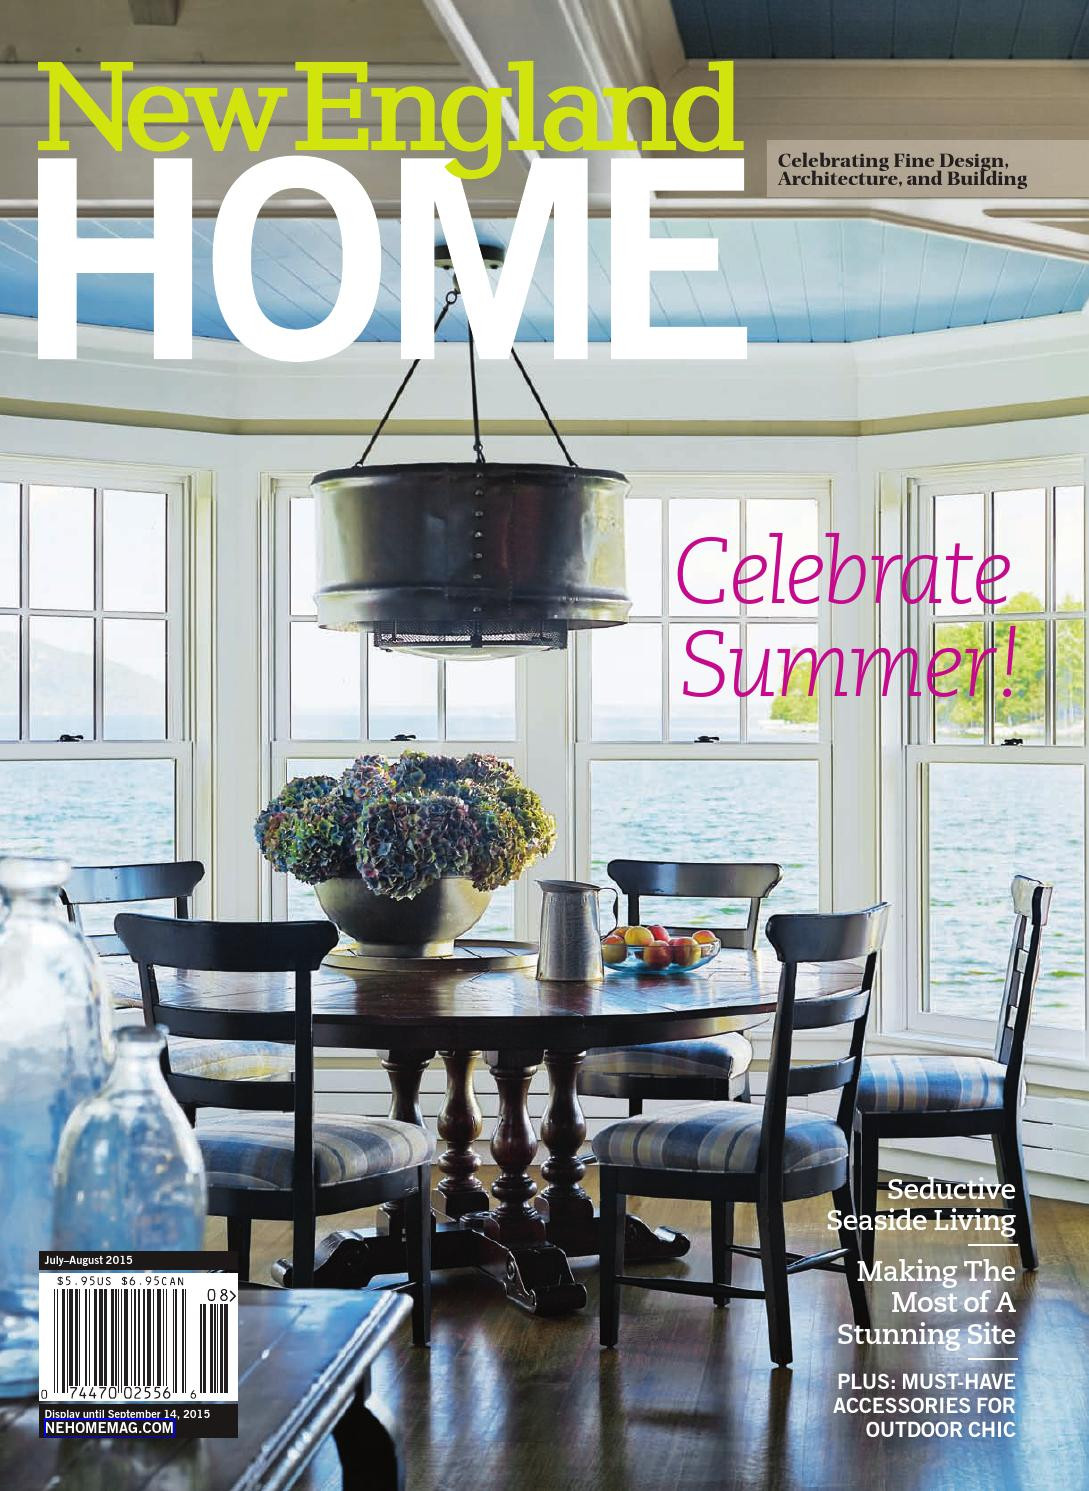 11 Nice Metallic Mosaic Terracotta Floor Vase 2024 free download metallic mosaic terracotta floor vase of new england home july august 2015 by new england home magazine llc intended for new england home july august 2015 by new england home magazine llc is